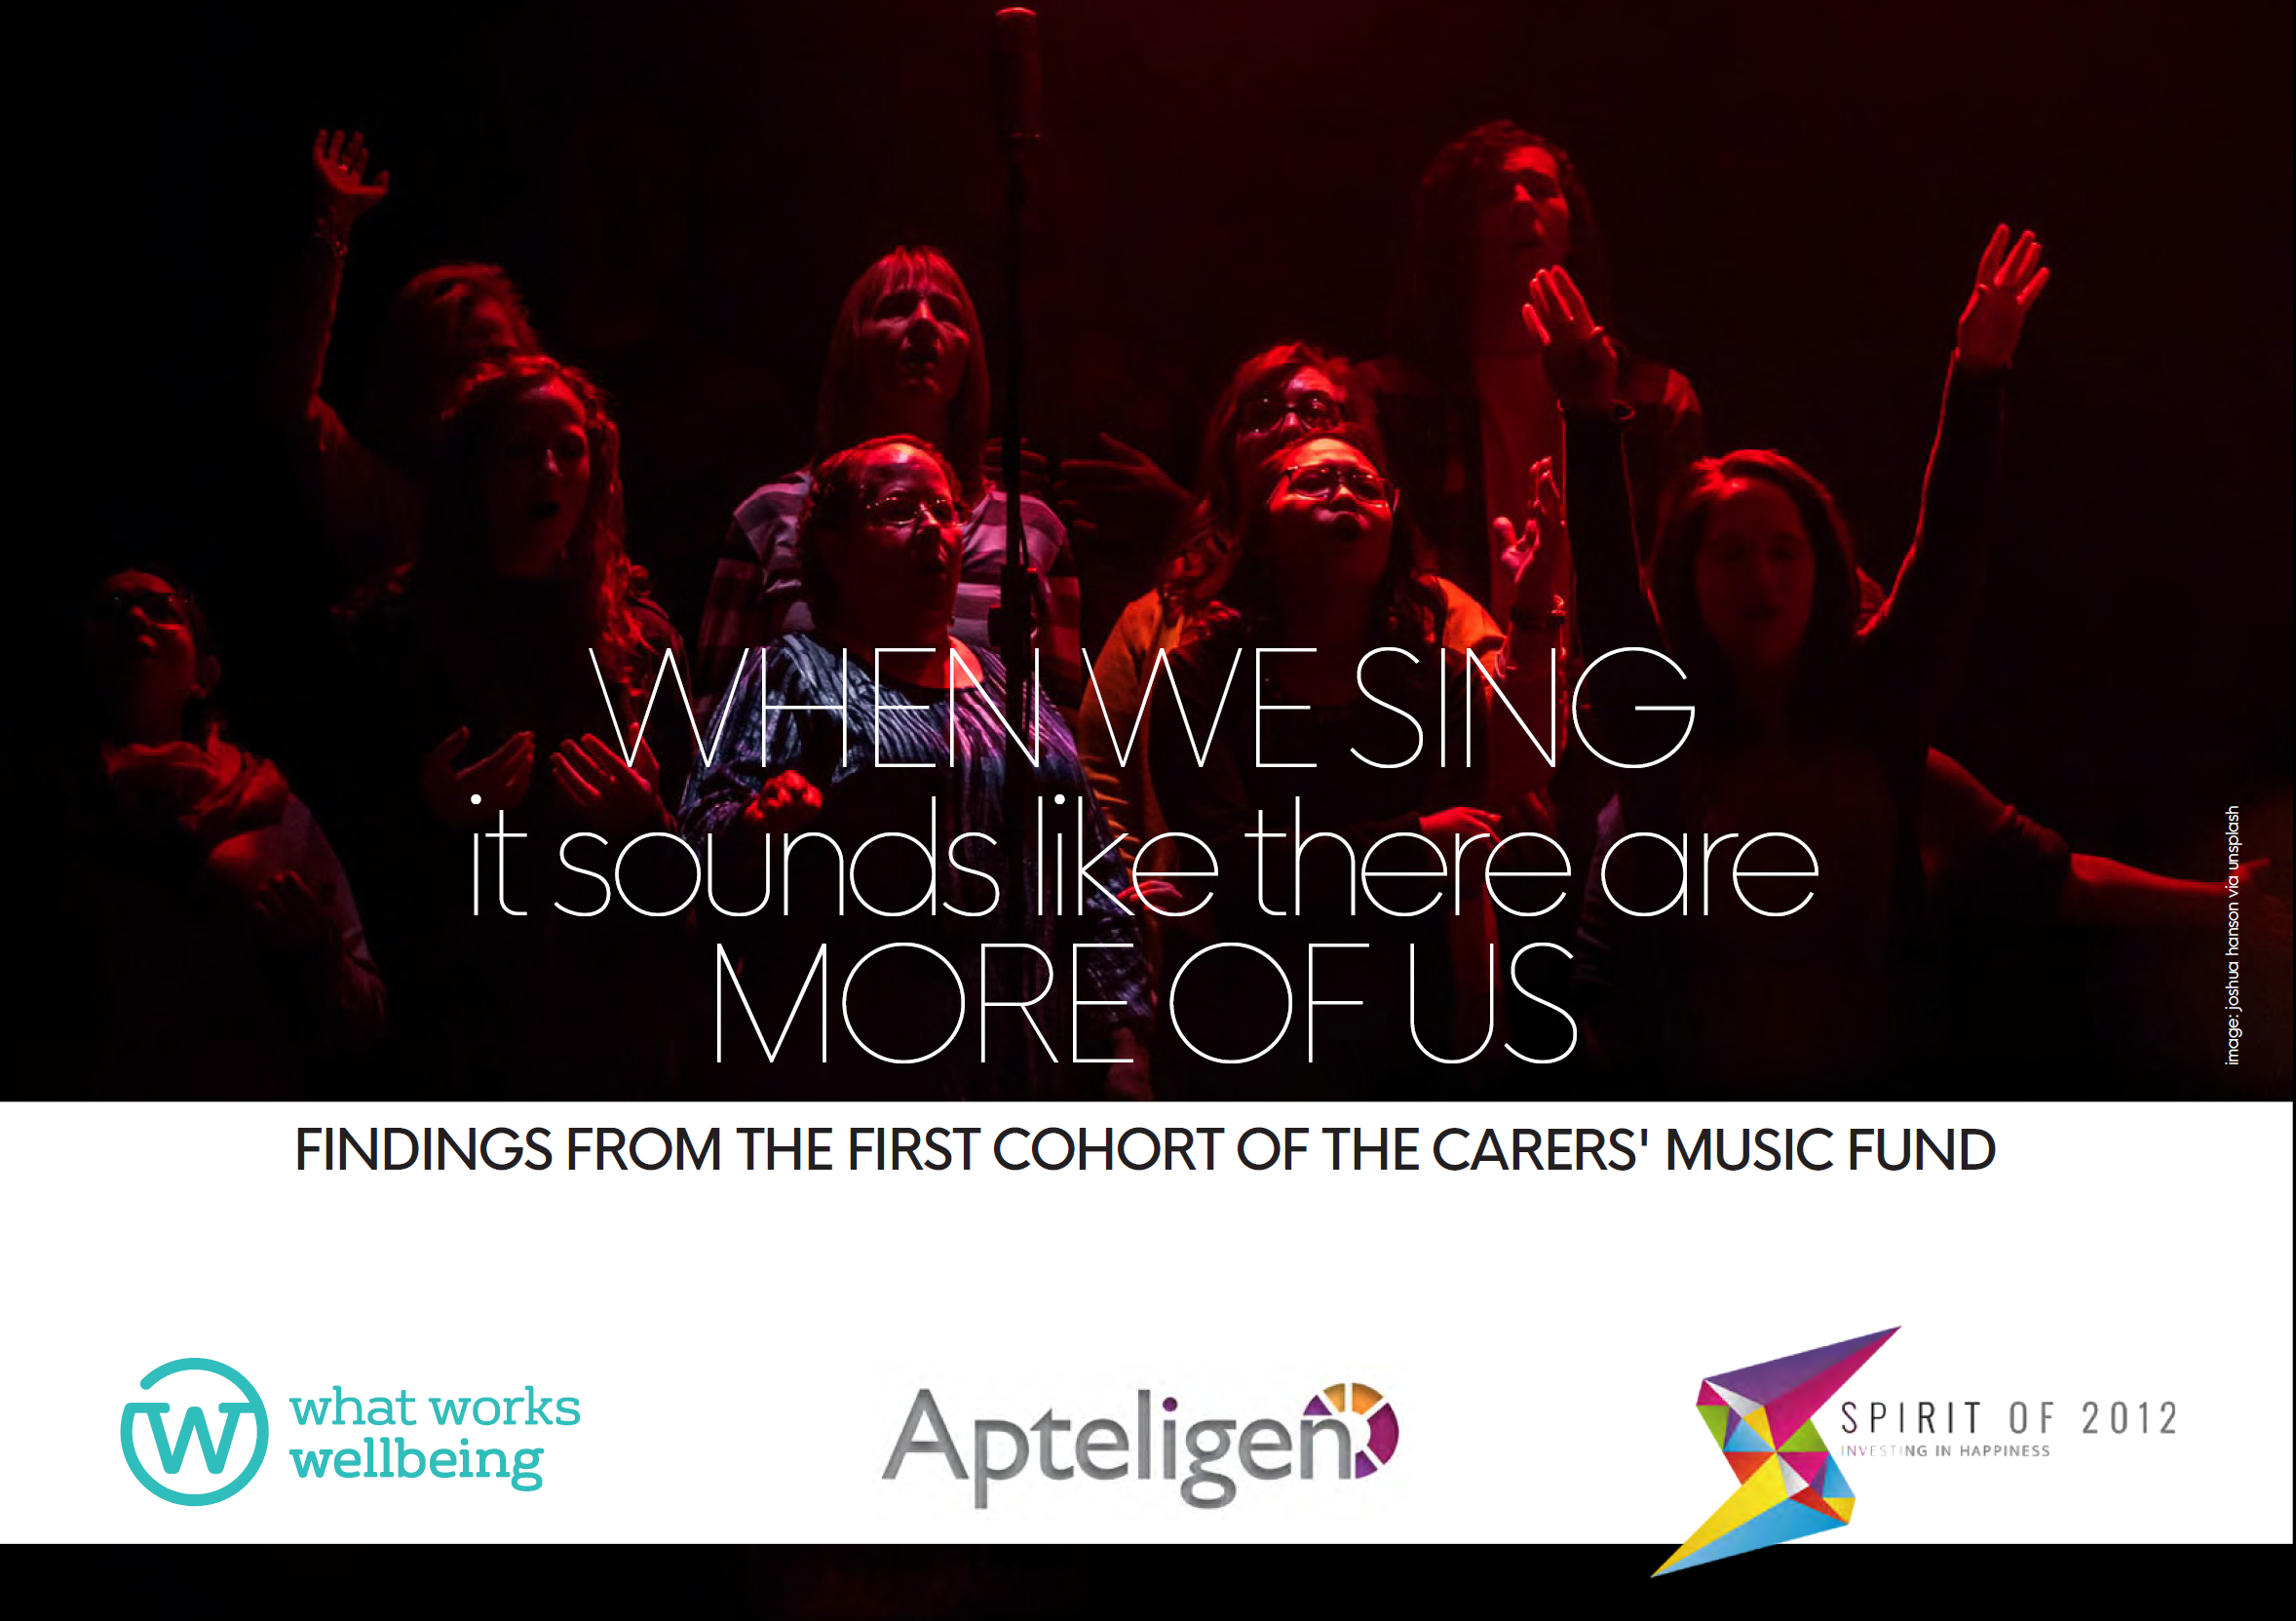 When we sing it sounds like there are more of us: Findings from the first cohort of the Carer’s Music Fund